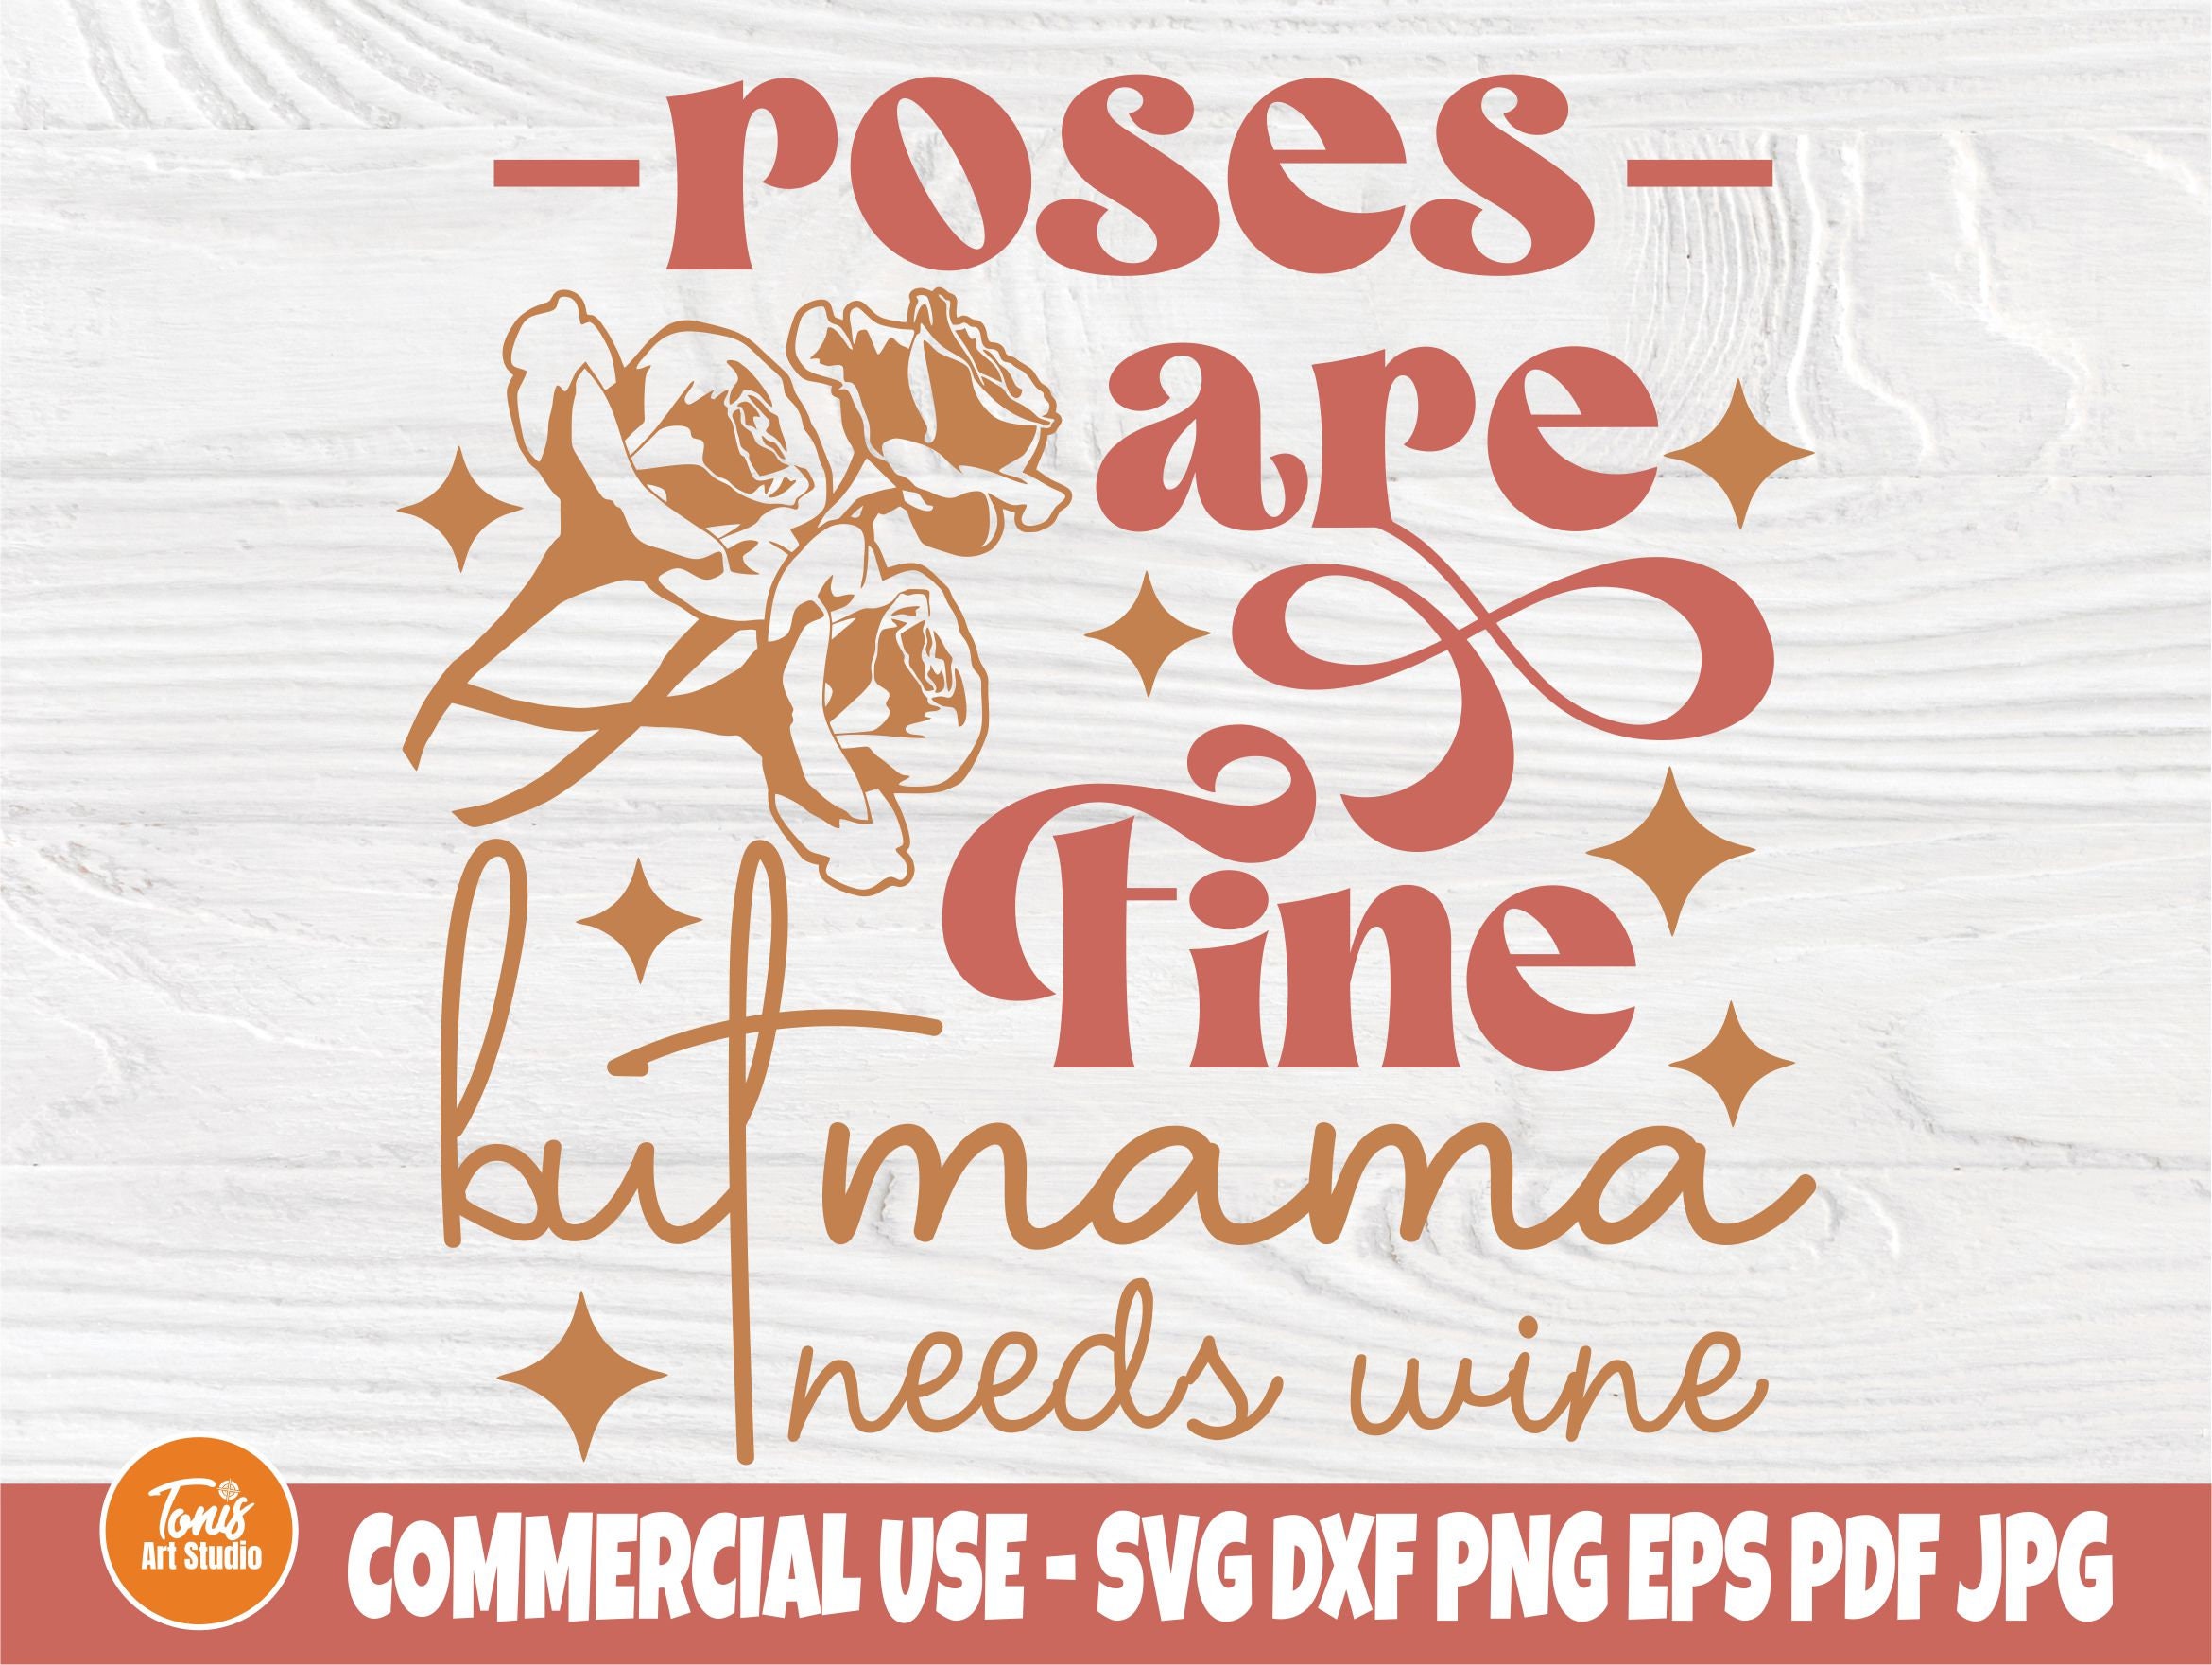 Buy Mama Needs Wine Svg Mama Needs Some Wine Svg Drinking Quotes Online in  India 